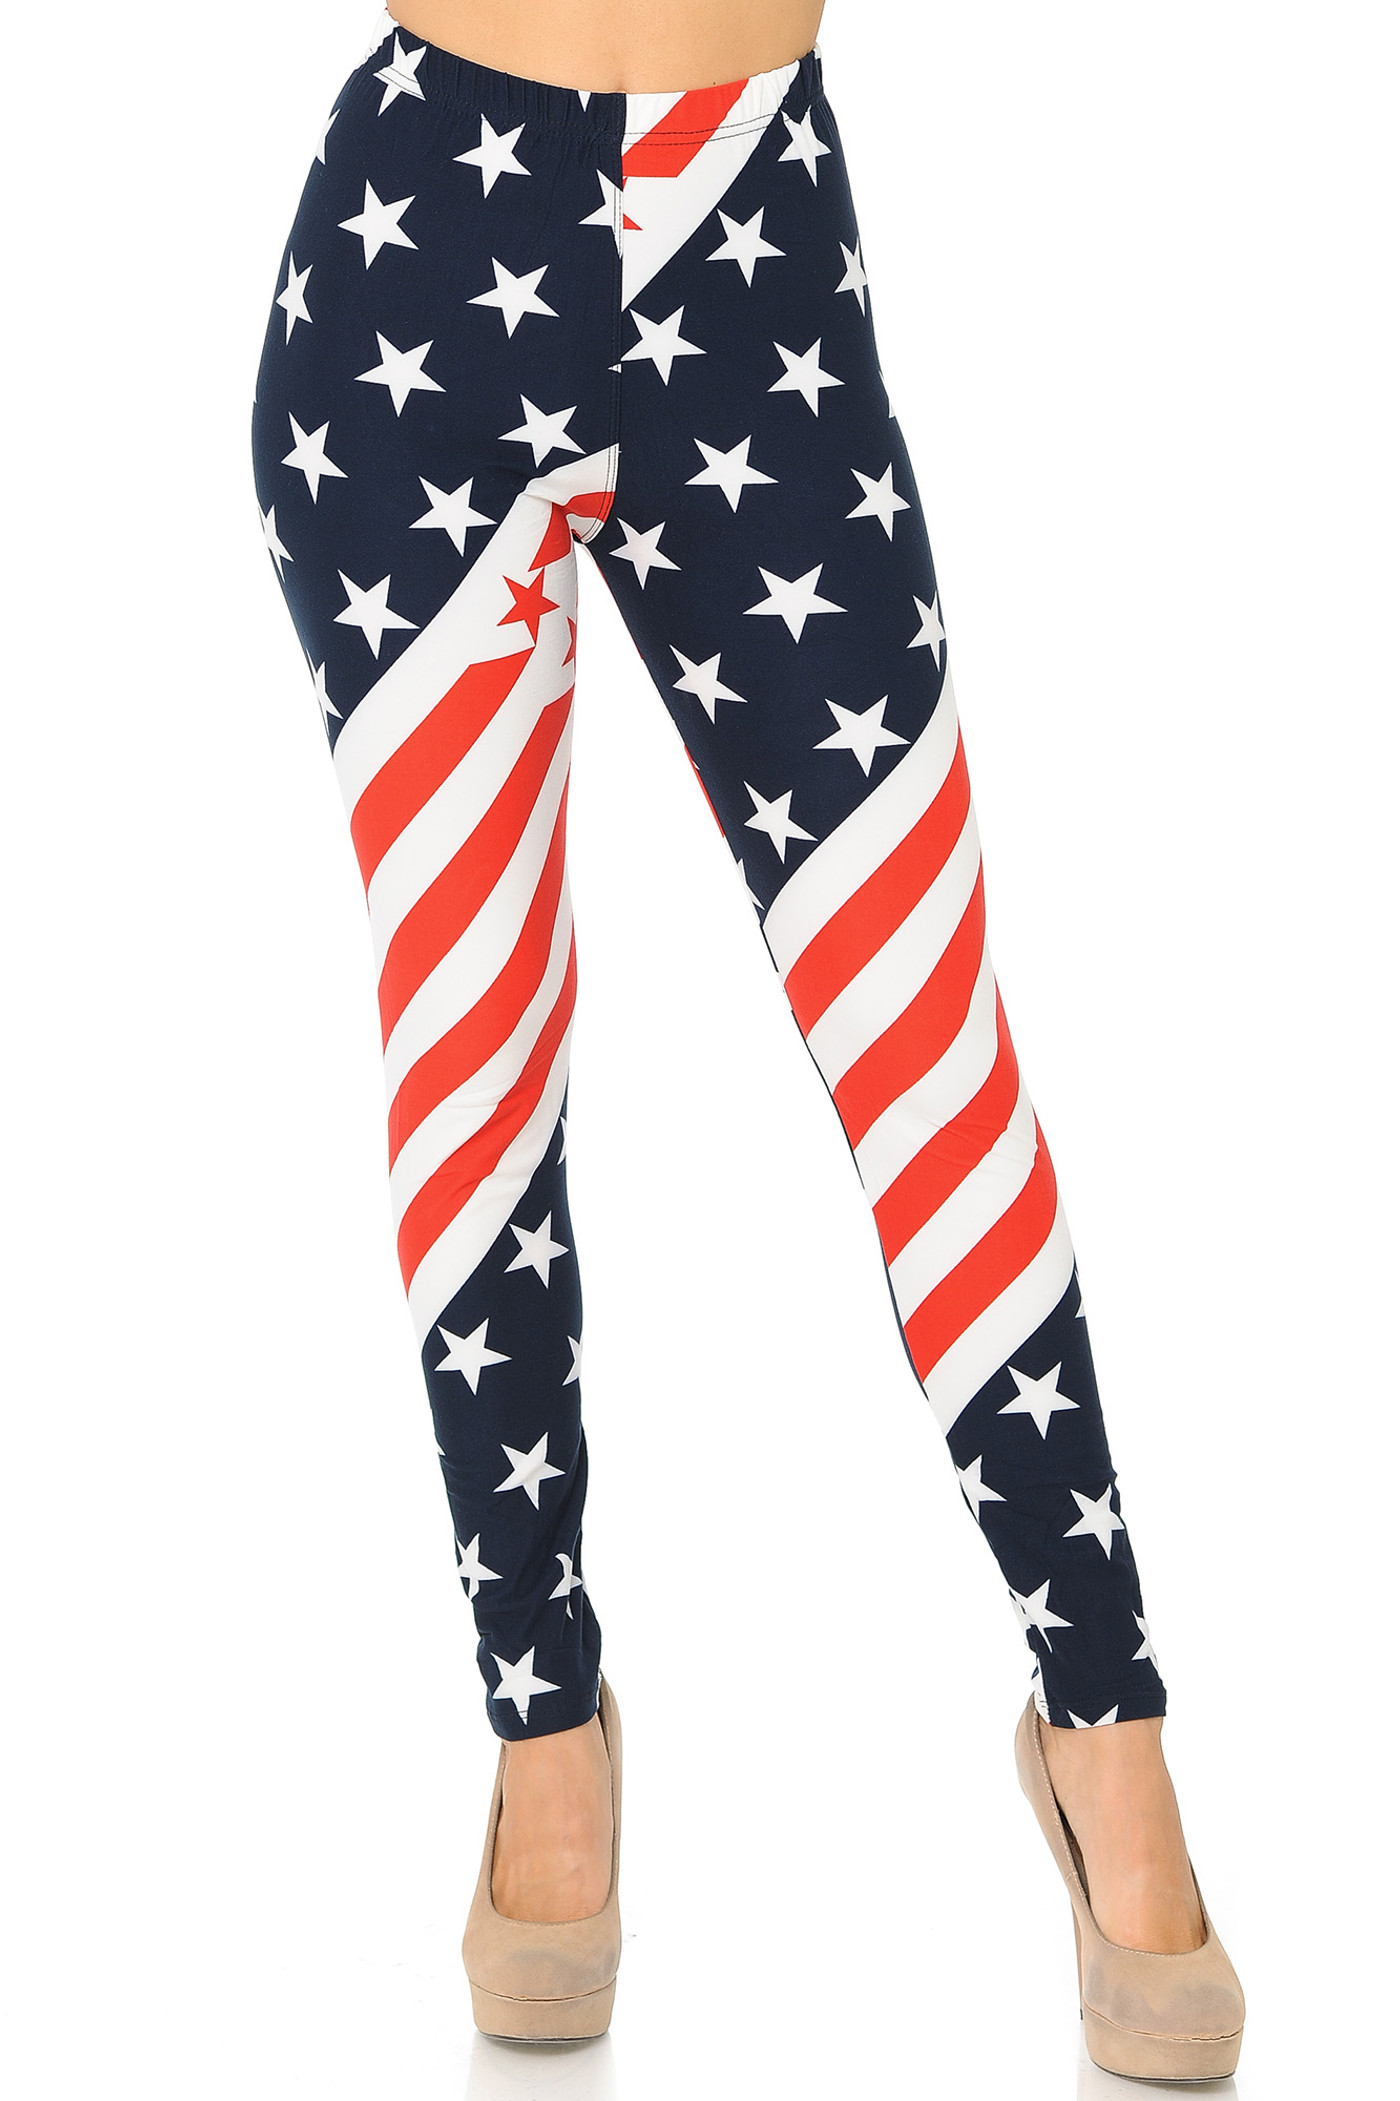 Buttery Smooth Twisting USA Flag Leggings